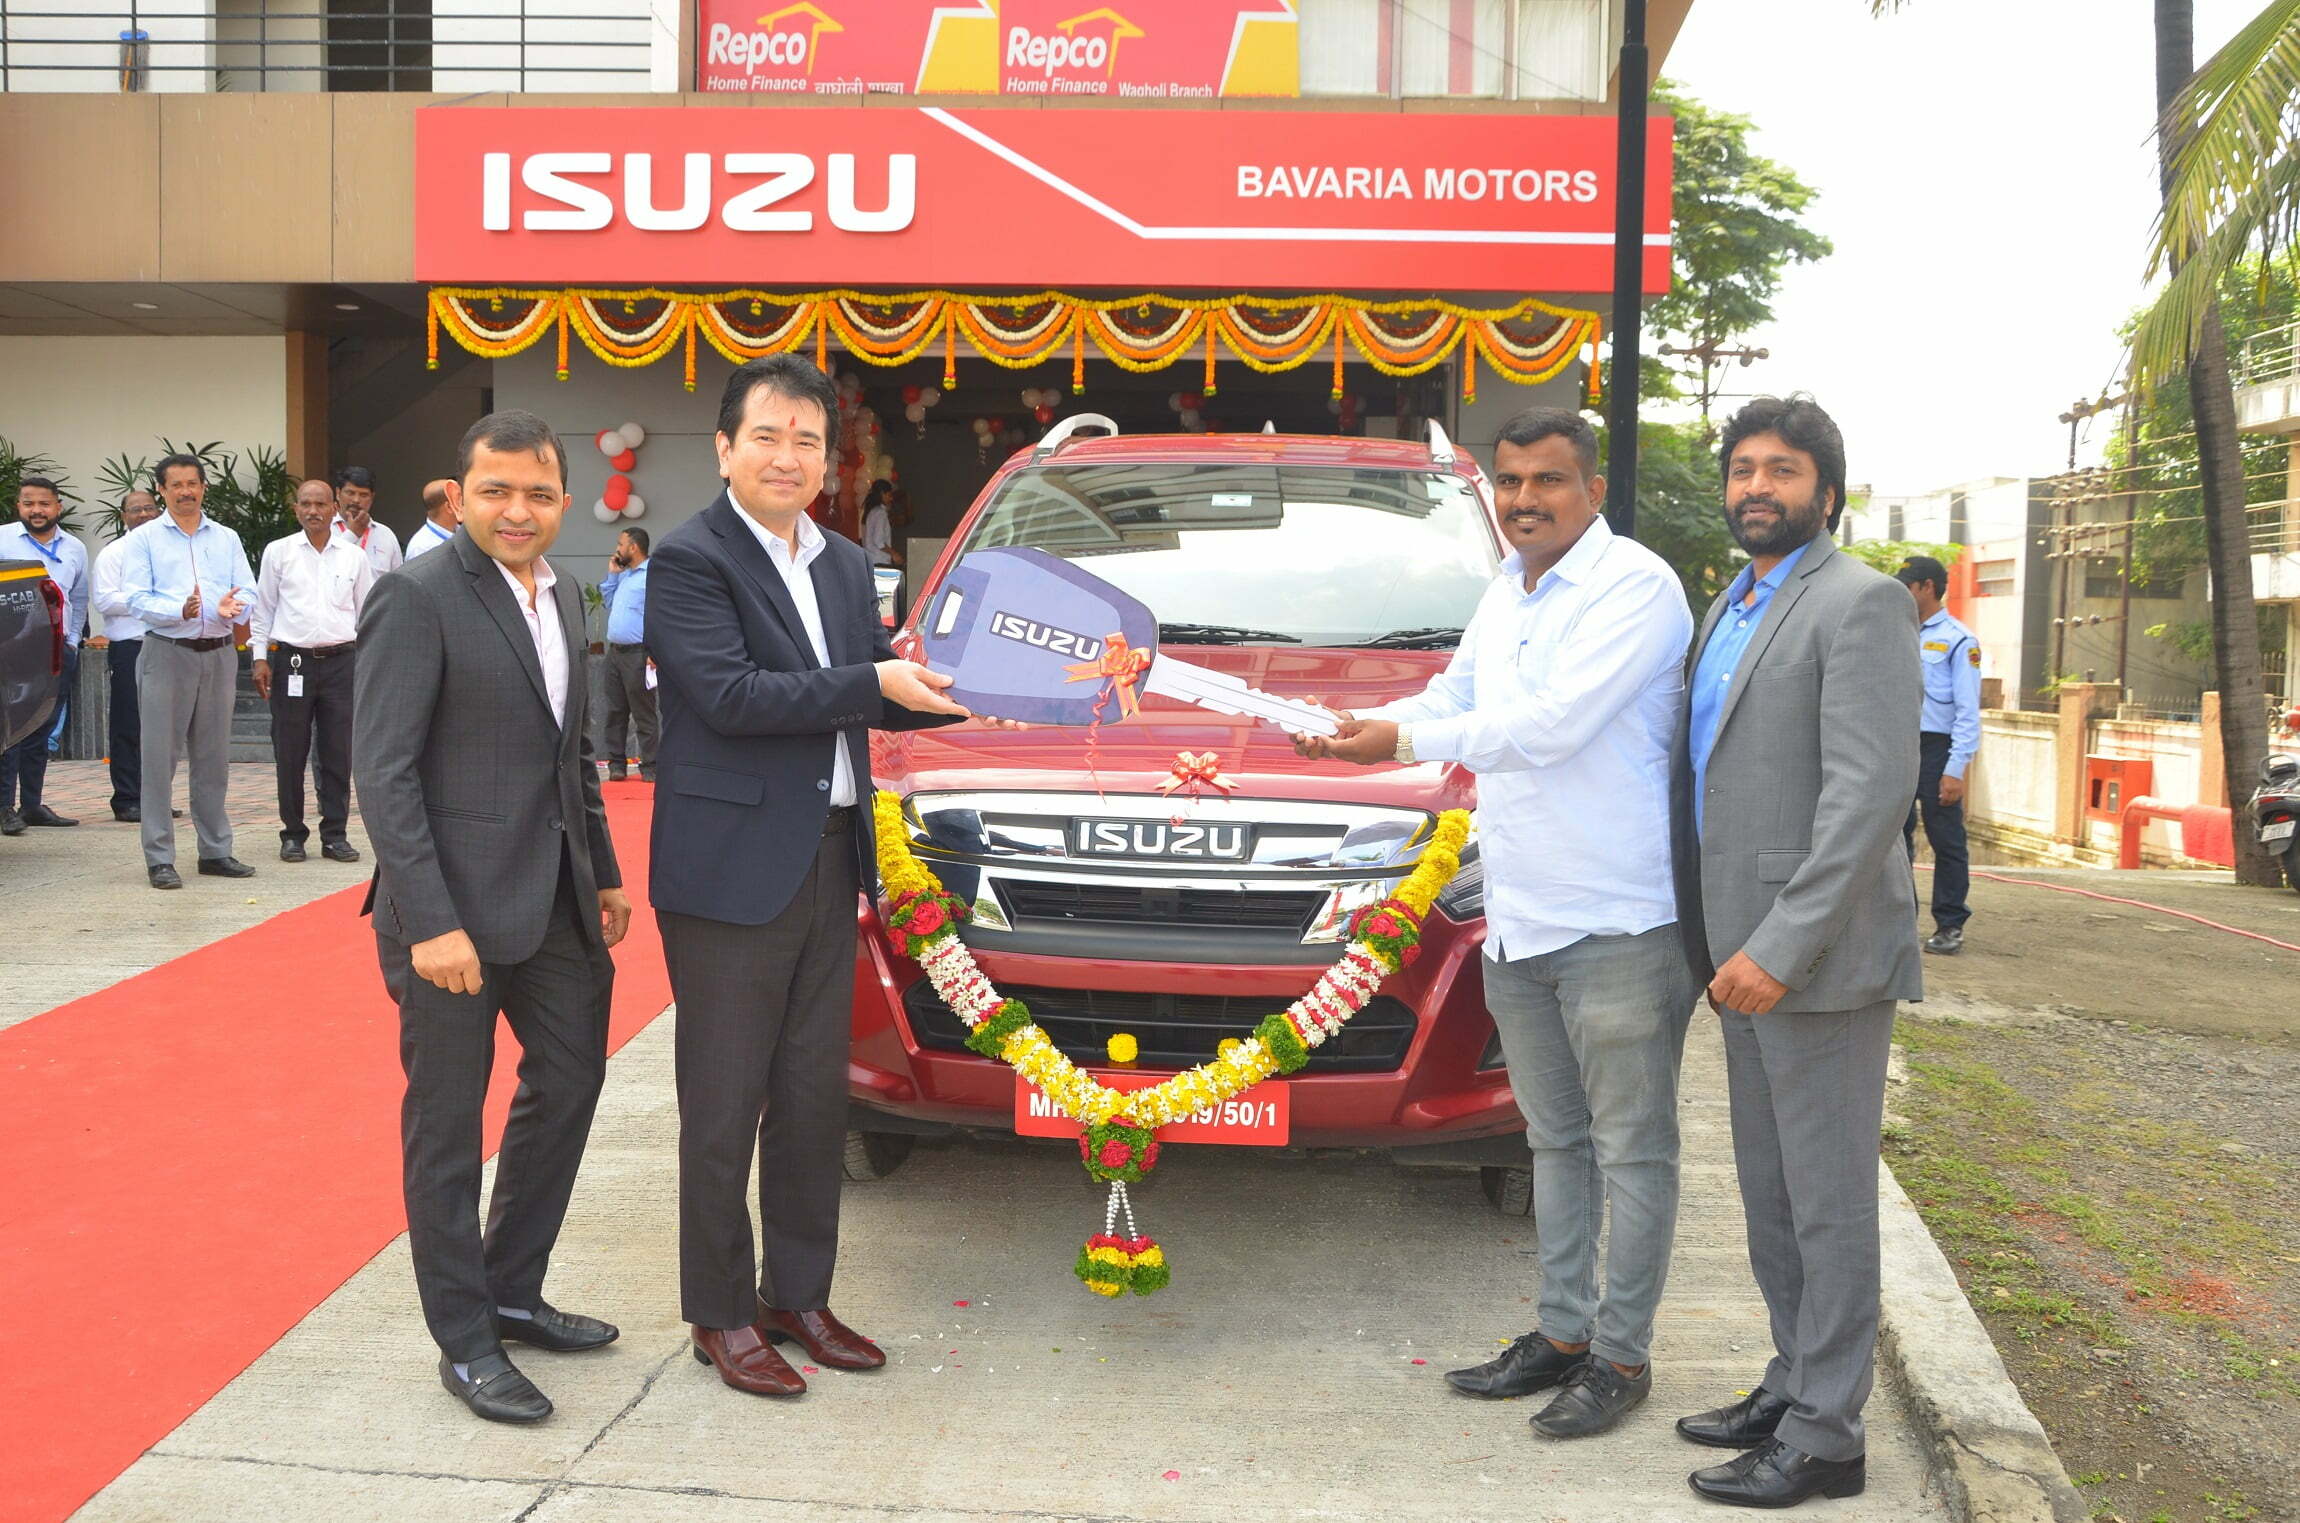 Bavaria ISUZU Pune Dealerships - A New Touchpoint For Punekars